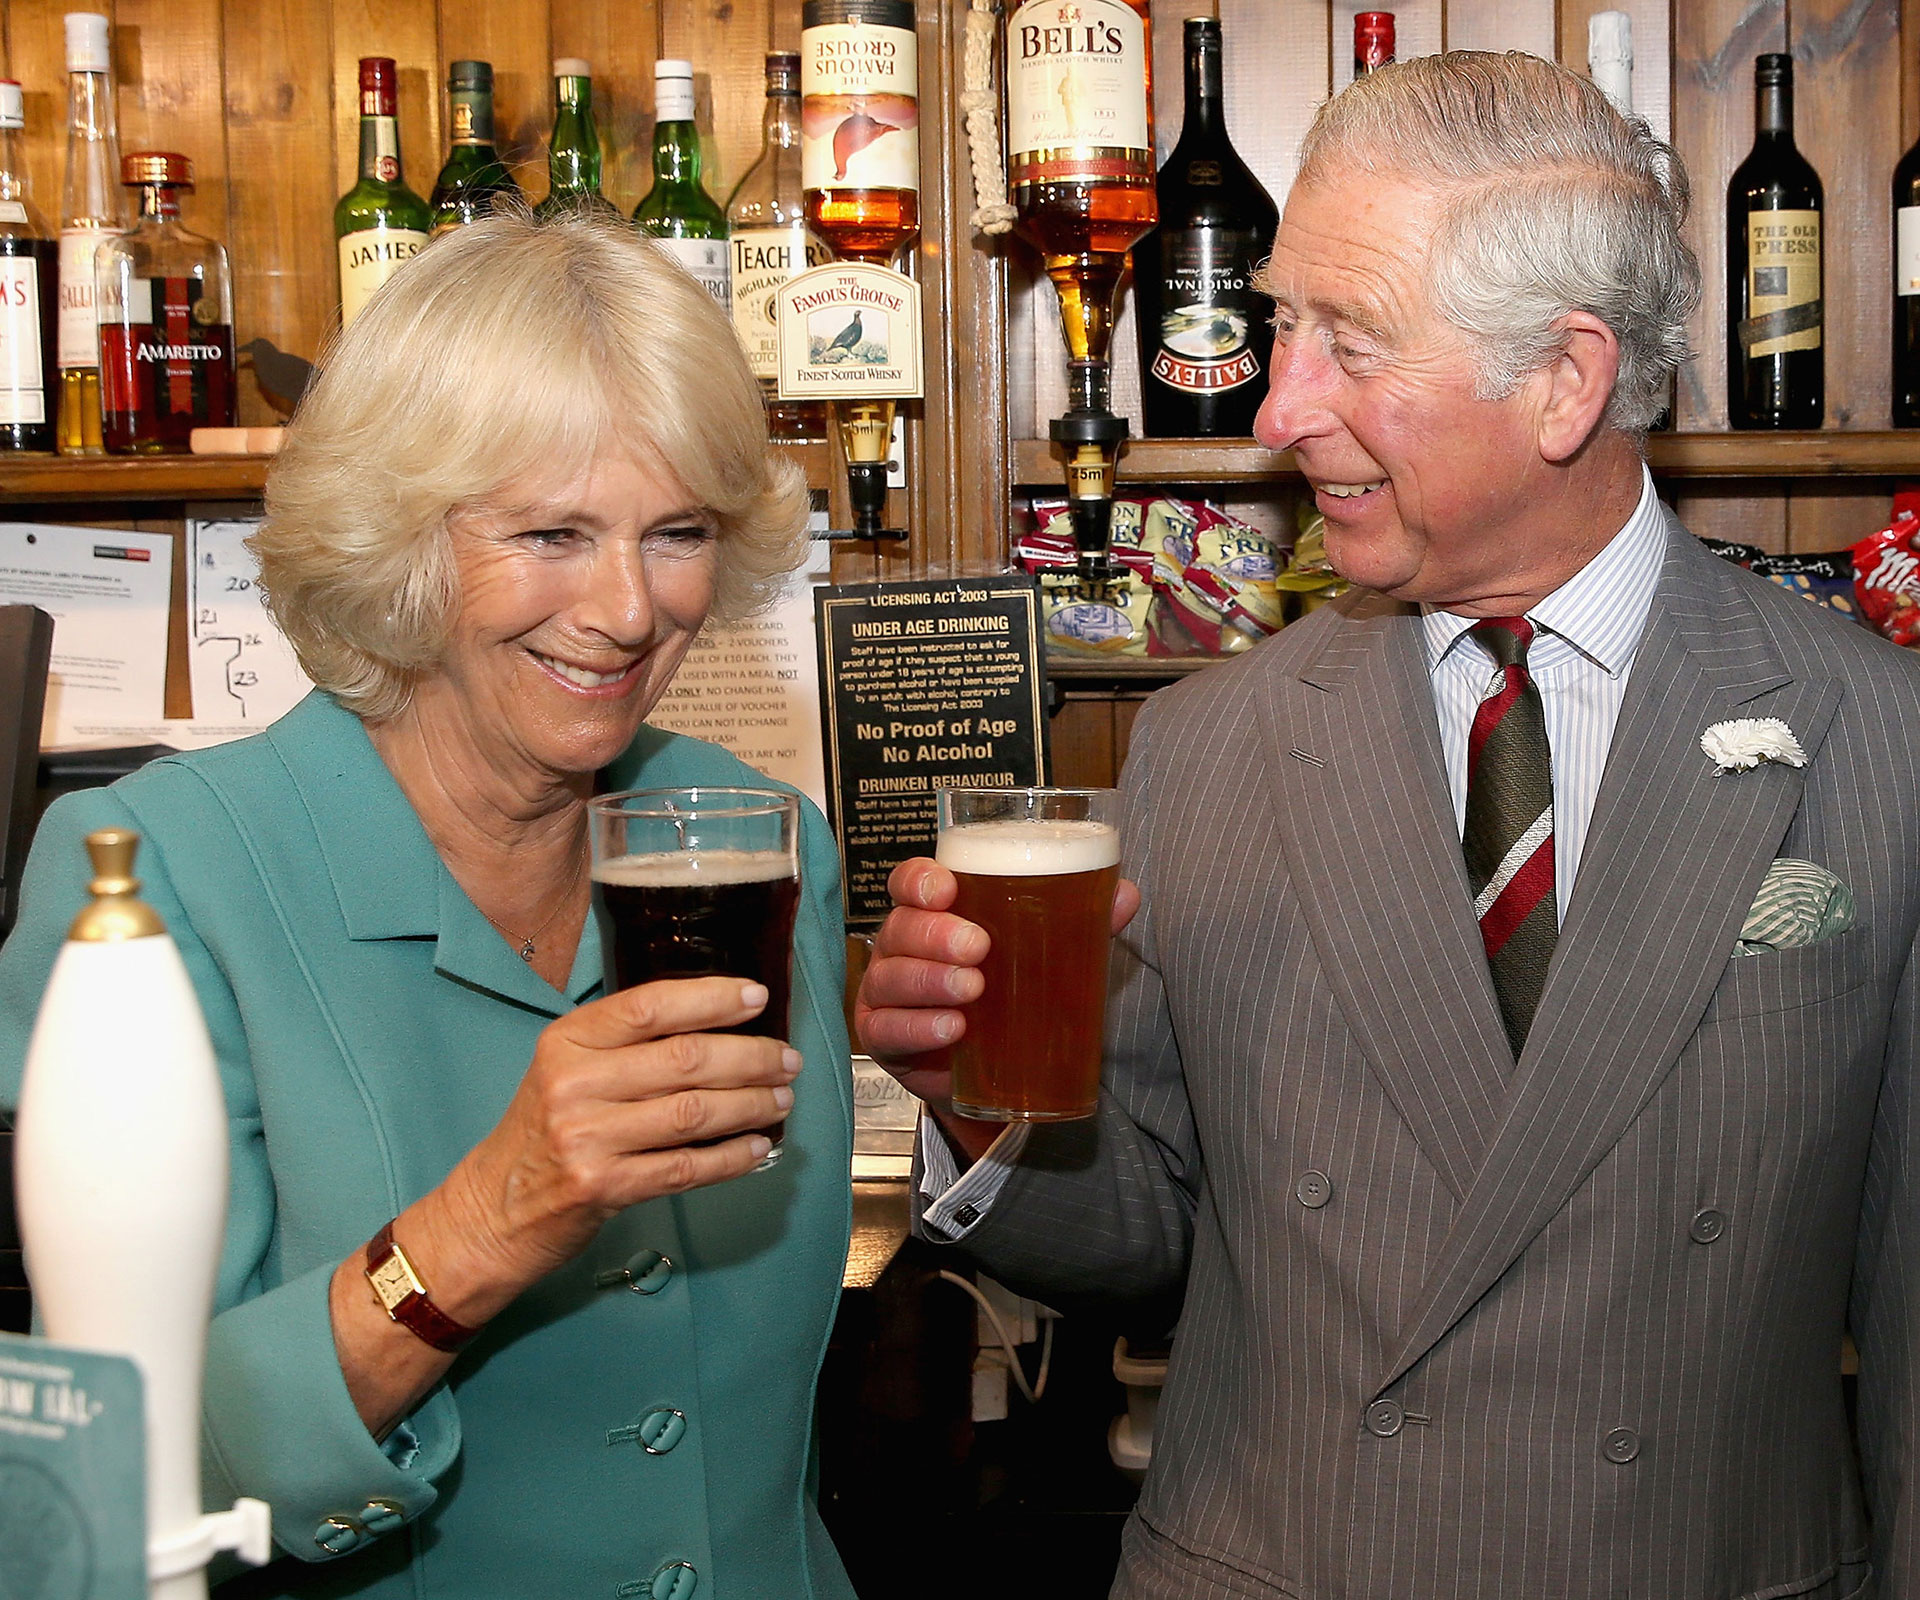 Prince Charles and Camilla, The Duchess of Cambridge 